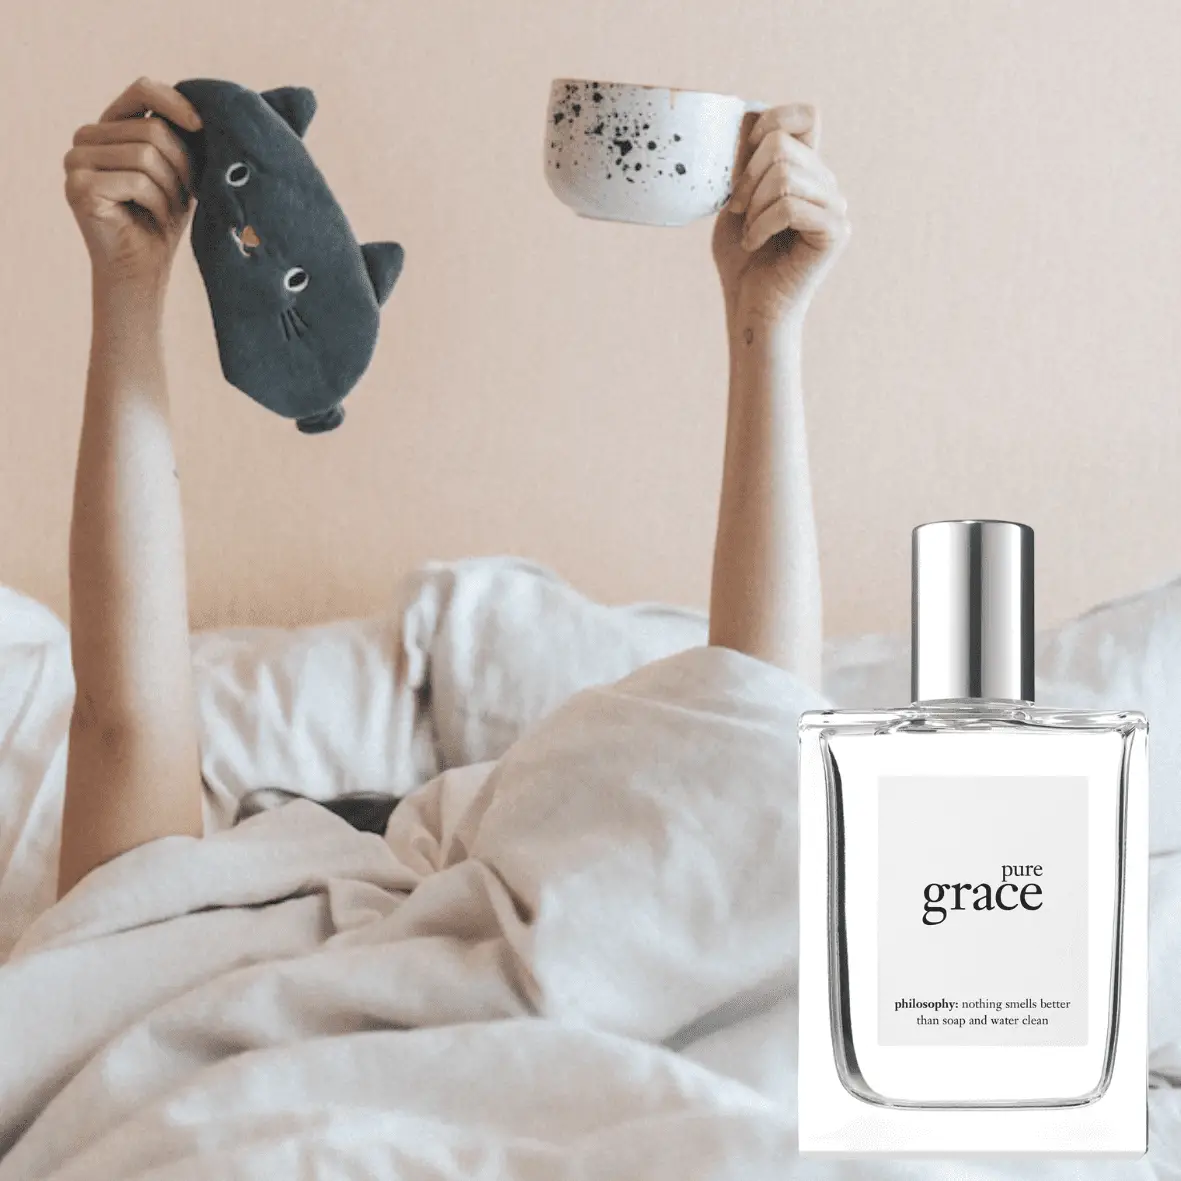 Philosophy Pure Grace
Perfumes That Smell like Fresh Laundry